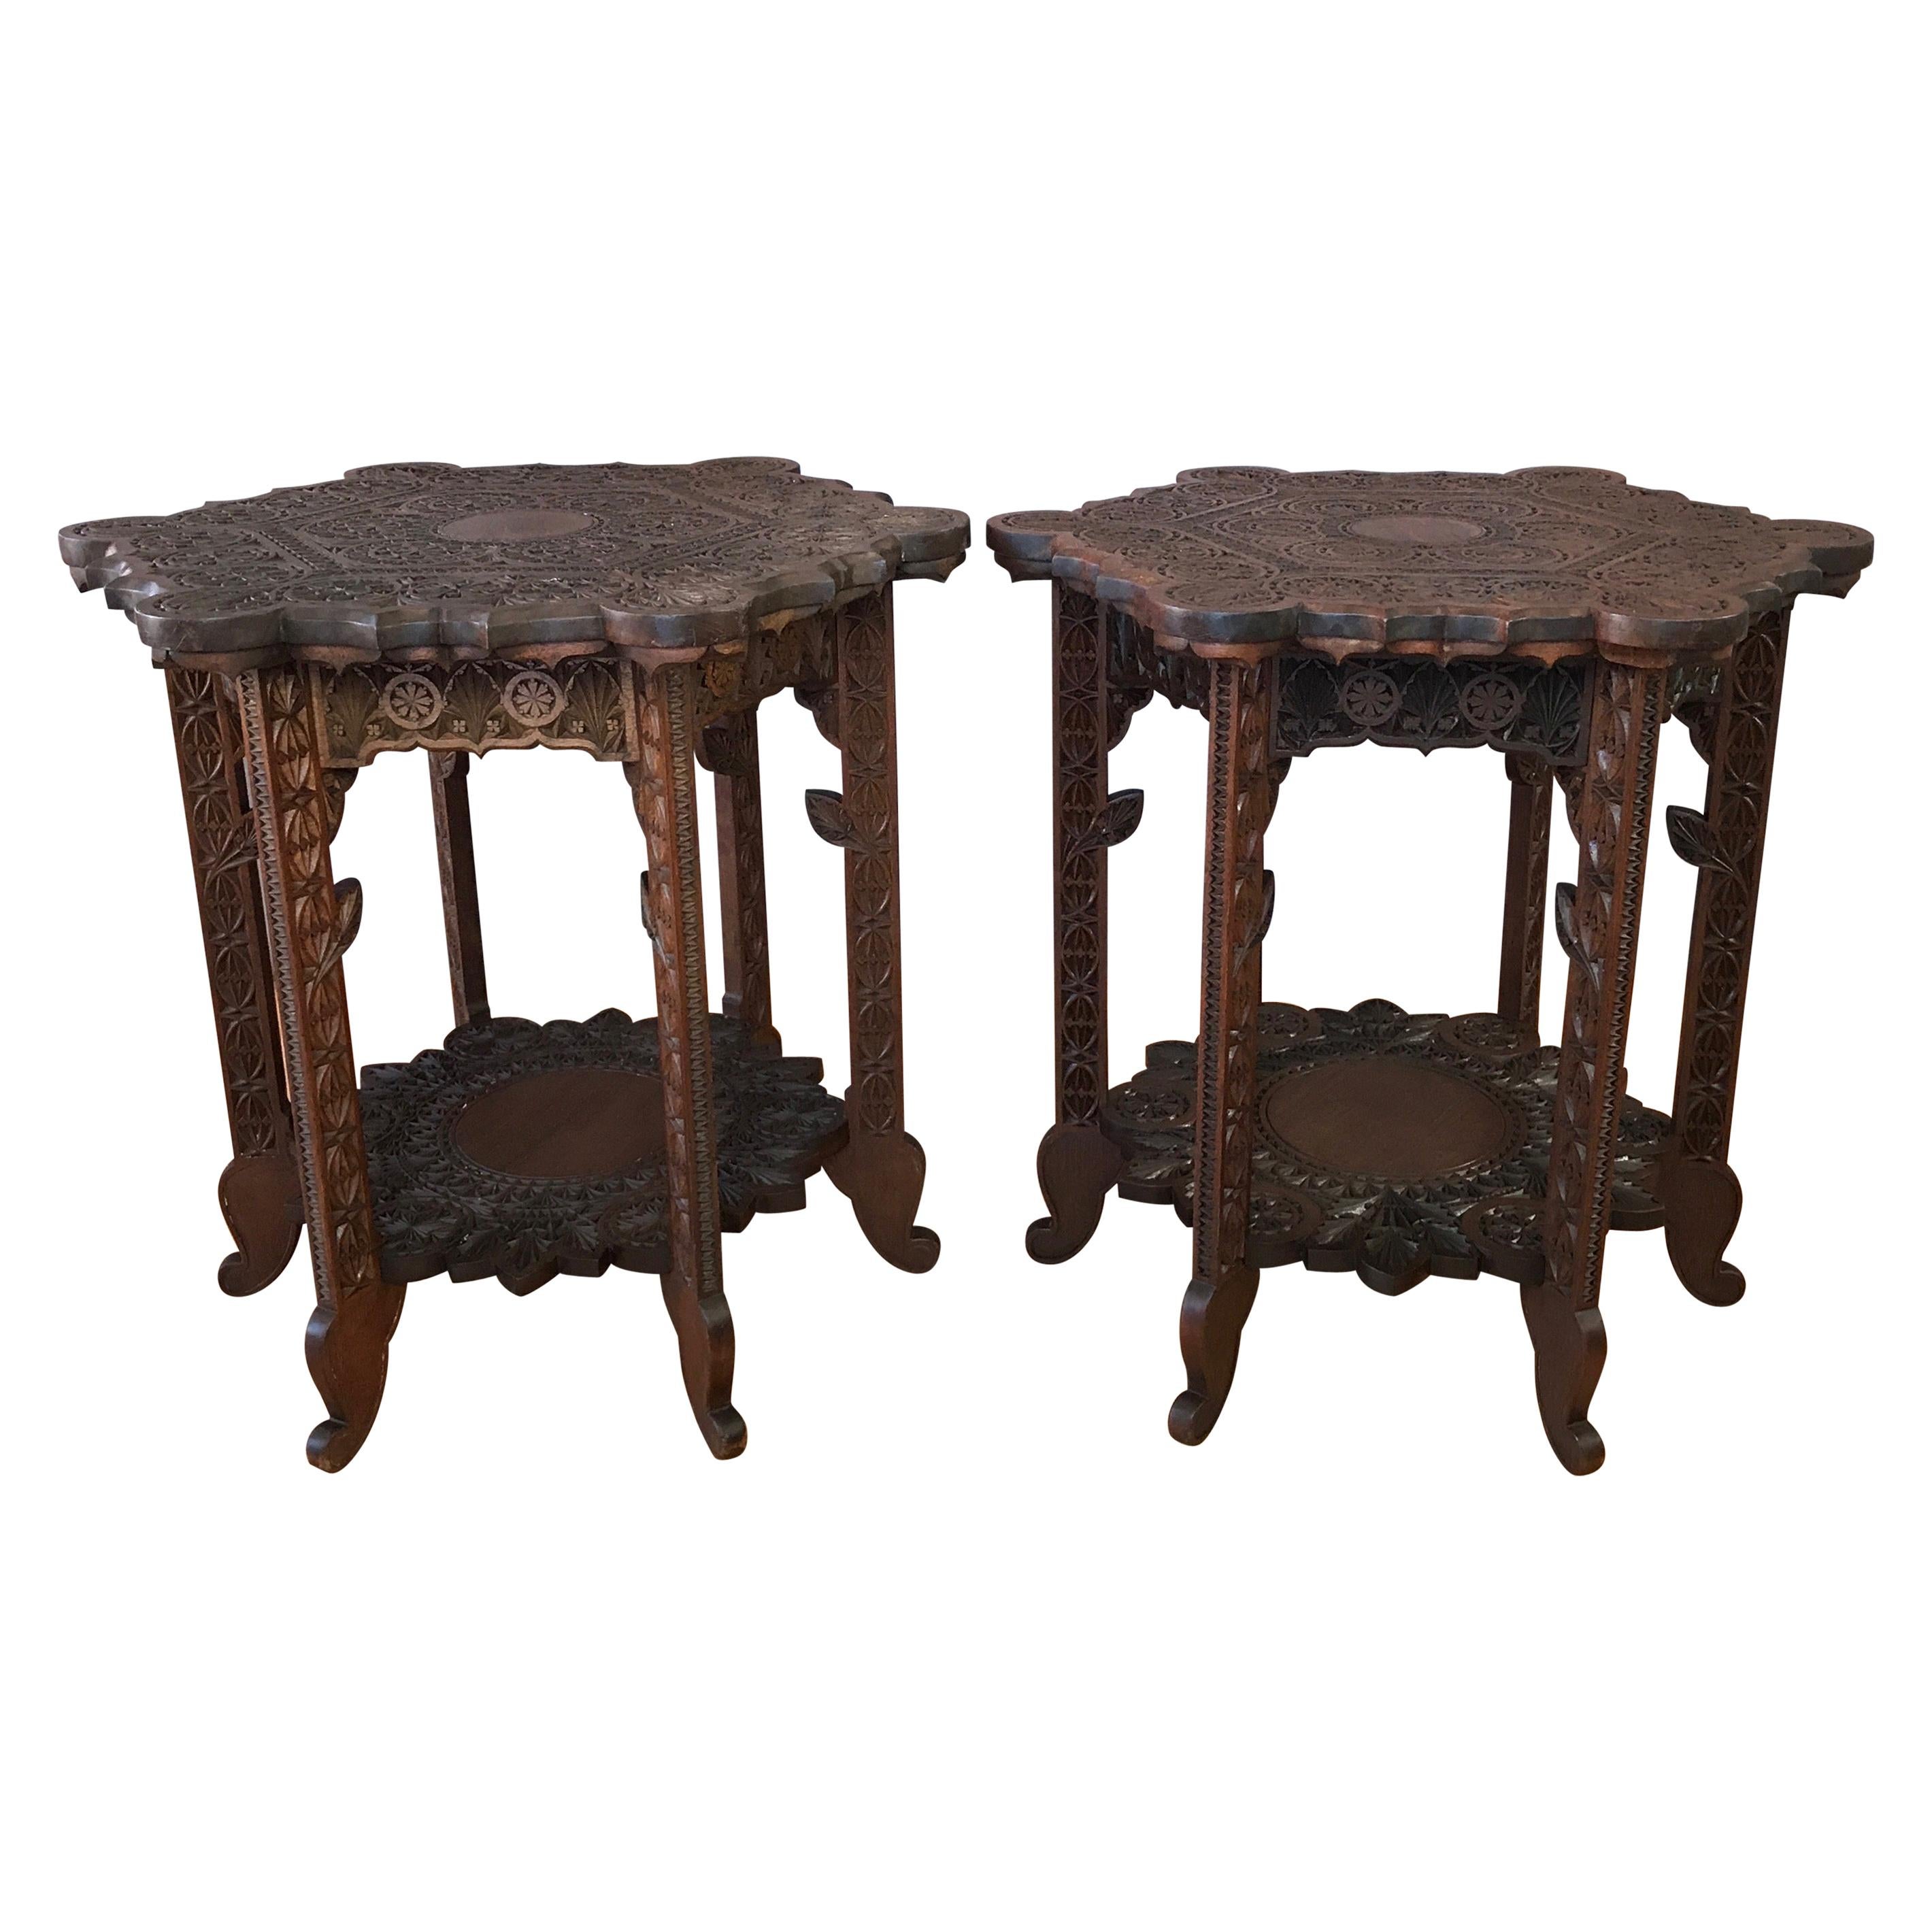 Pair of Anglo-Indian Carved Rosewood Hexagonal Side Tables, Early 1900s